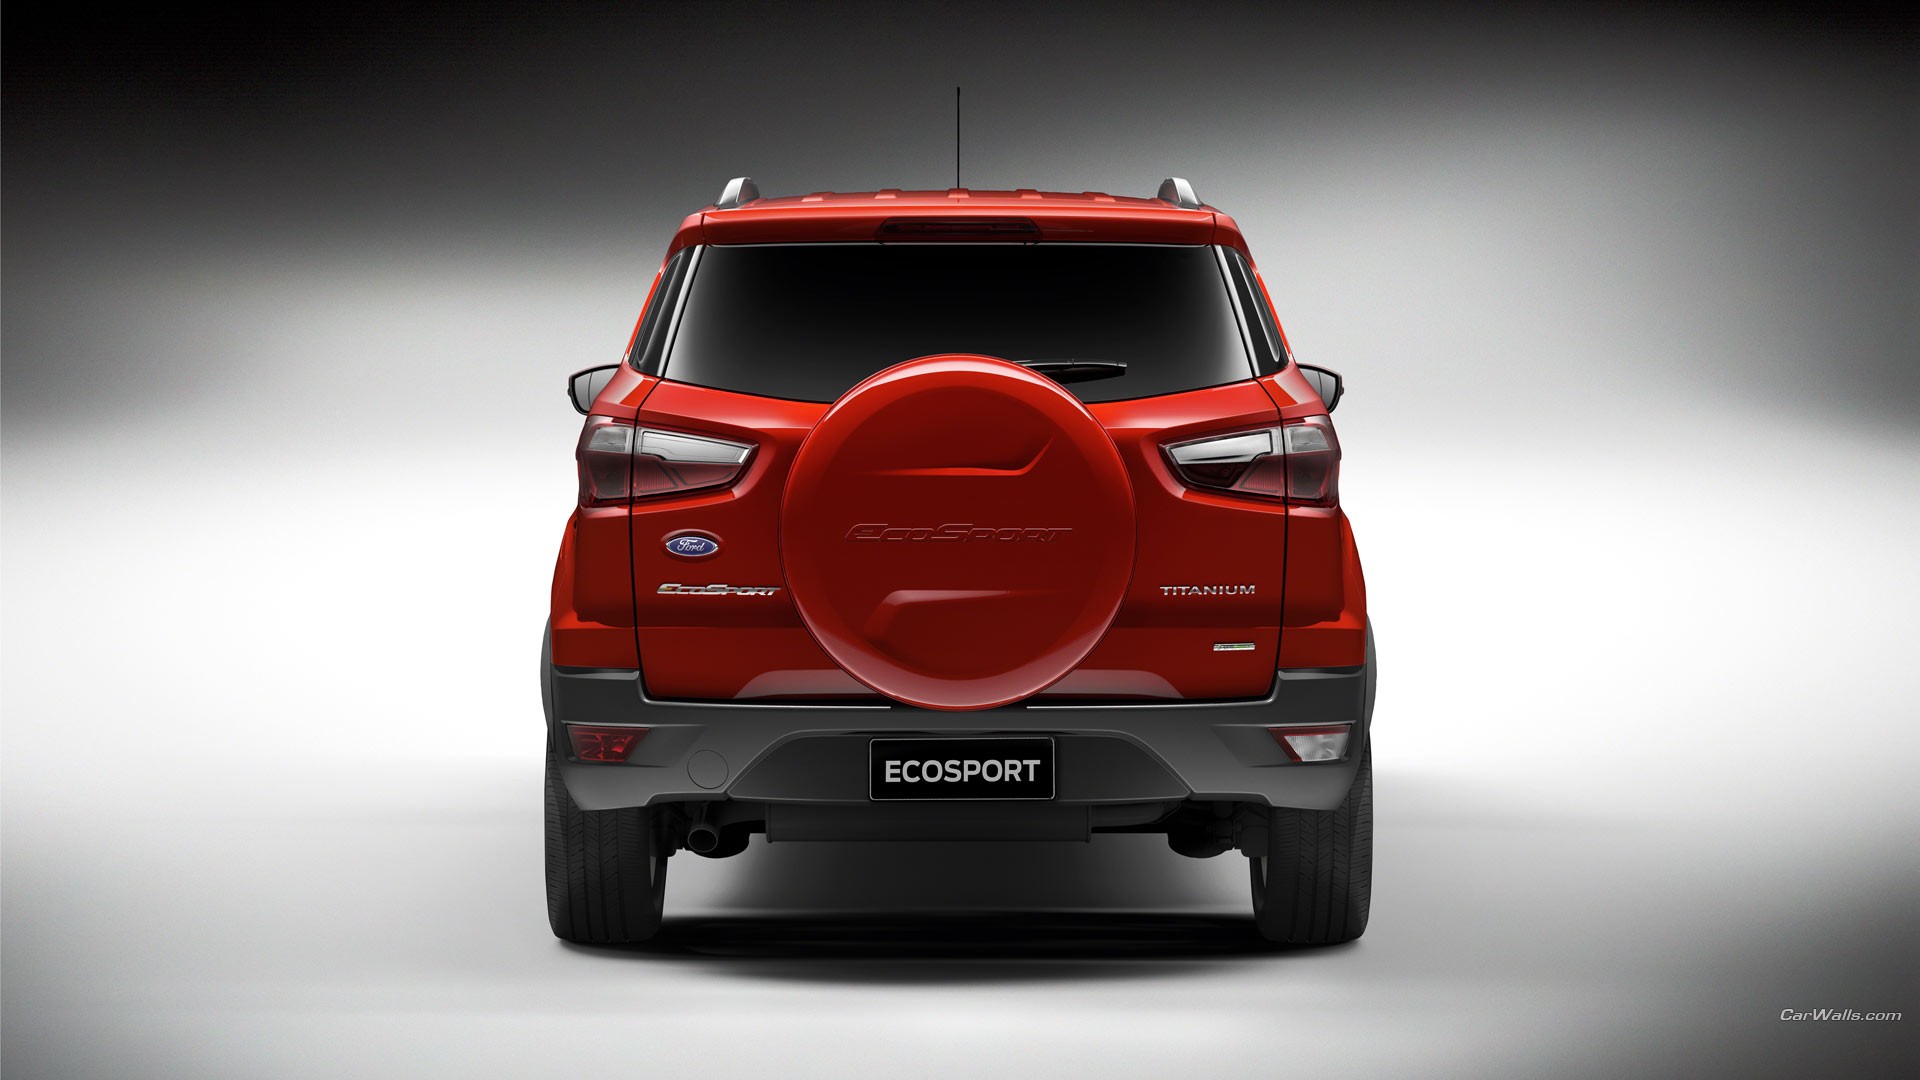 General 1920x1080 Ford EcoSport car SUV Ford red cars vehicle Brazilian cars rear view minimalism simple background